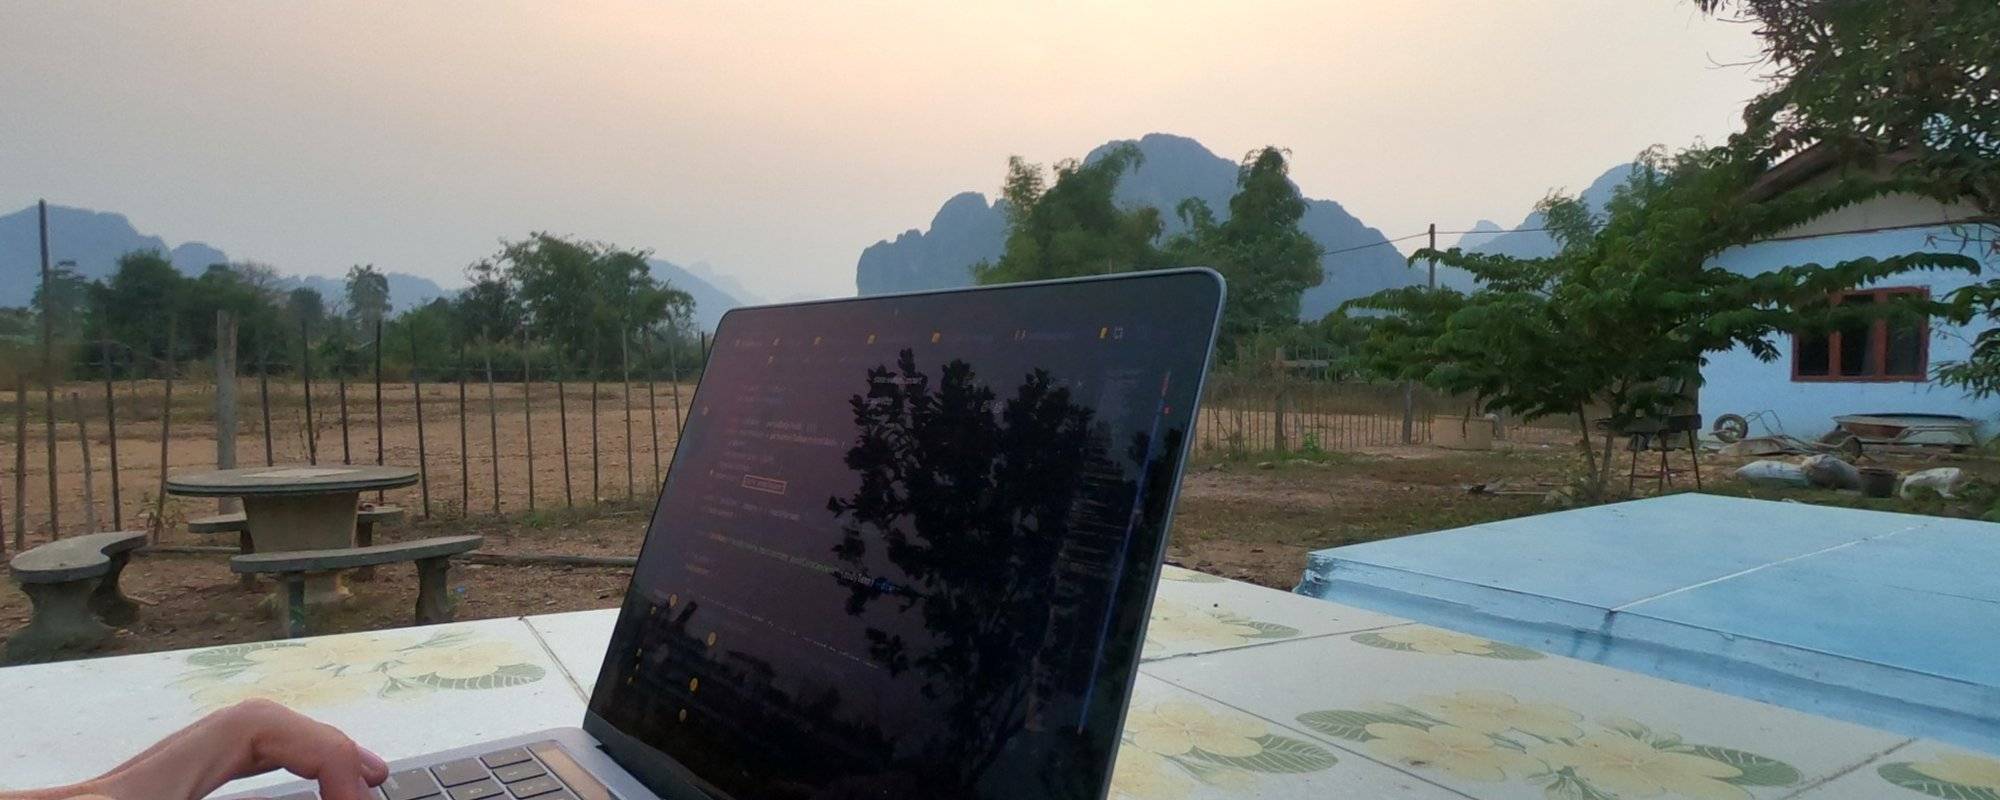 How to Quit Your 9 to 5 Job  to Become a Digital Nomad | 9 Things to Do Before You Go